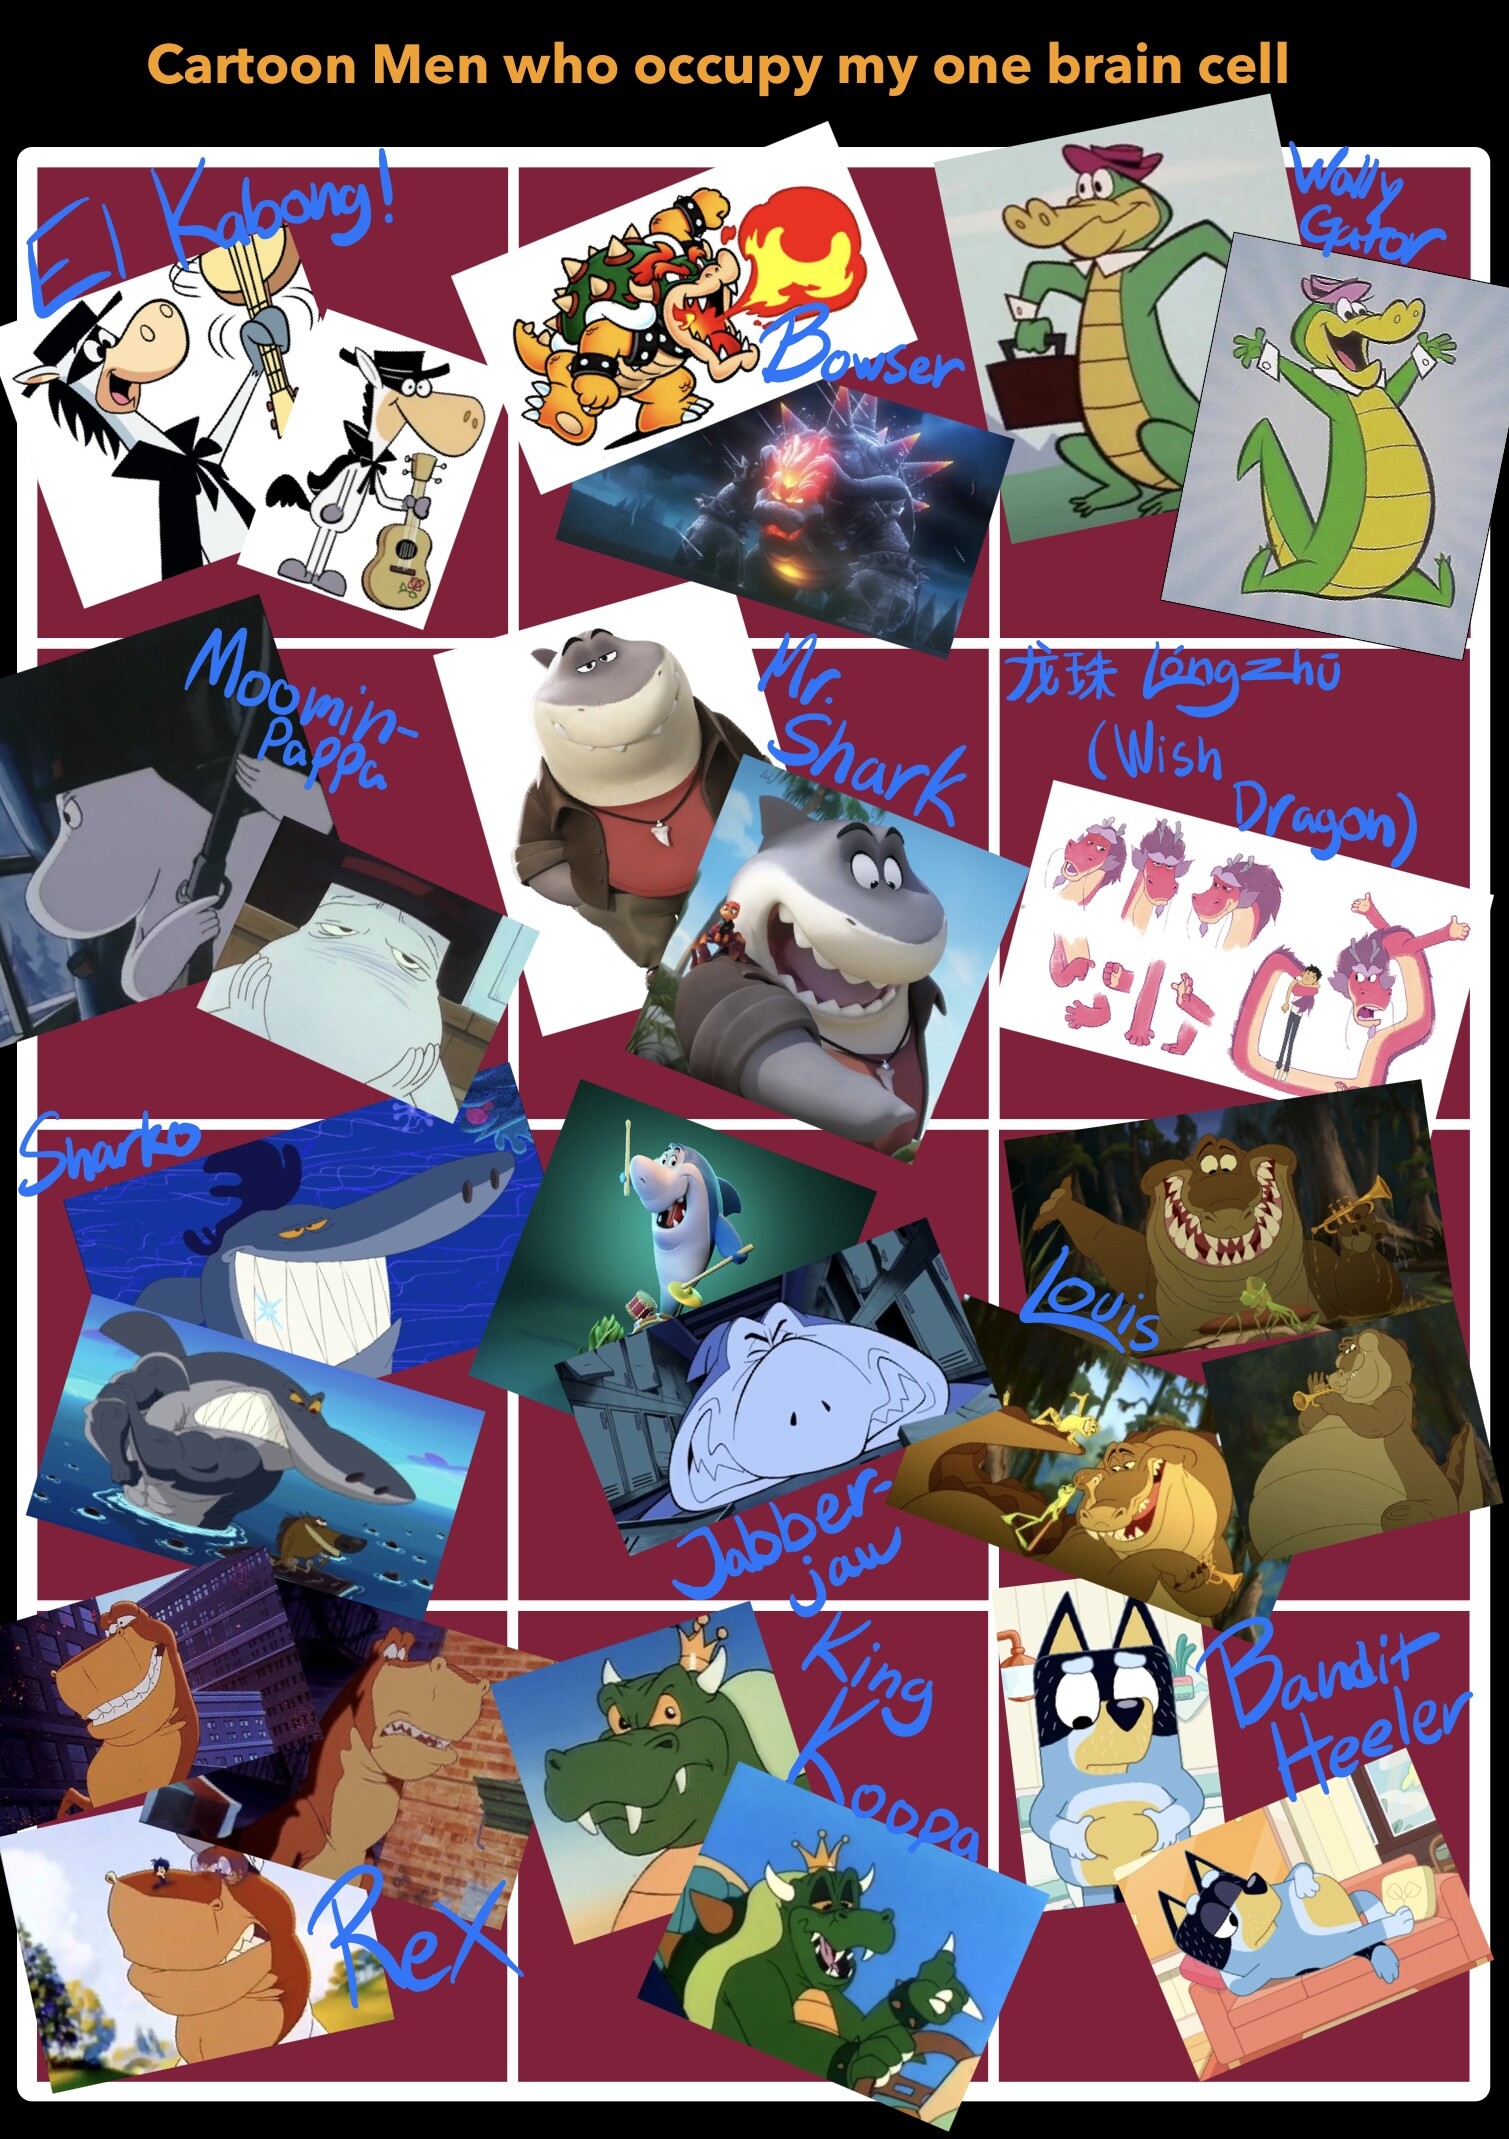 Title: Cartoon Men who occupy my one brain cell

The image consists of a grid with various images of cartoon characters, they are as follows (left to right, top to bottom):

El Kabong (Quick Draw McGraw technically).
Bowser.
Wally Gator.
Moominpappa.
Mr. Shark (from The Bad Guys).
Longzhu (Wish Dragon).
Sharko (from Zig & Sharko).
Jabberjaw.
Louis (from Princess and the Frog)
Rex (from We're Back!).
King Koopa.
Bandit Heeler.